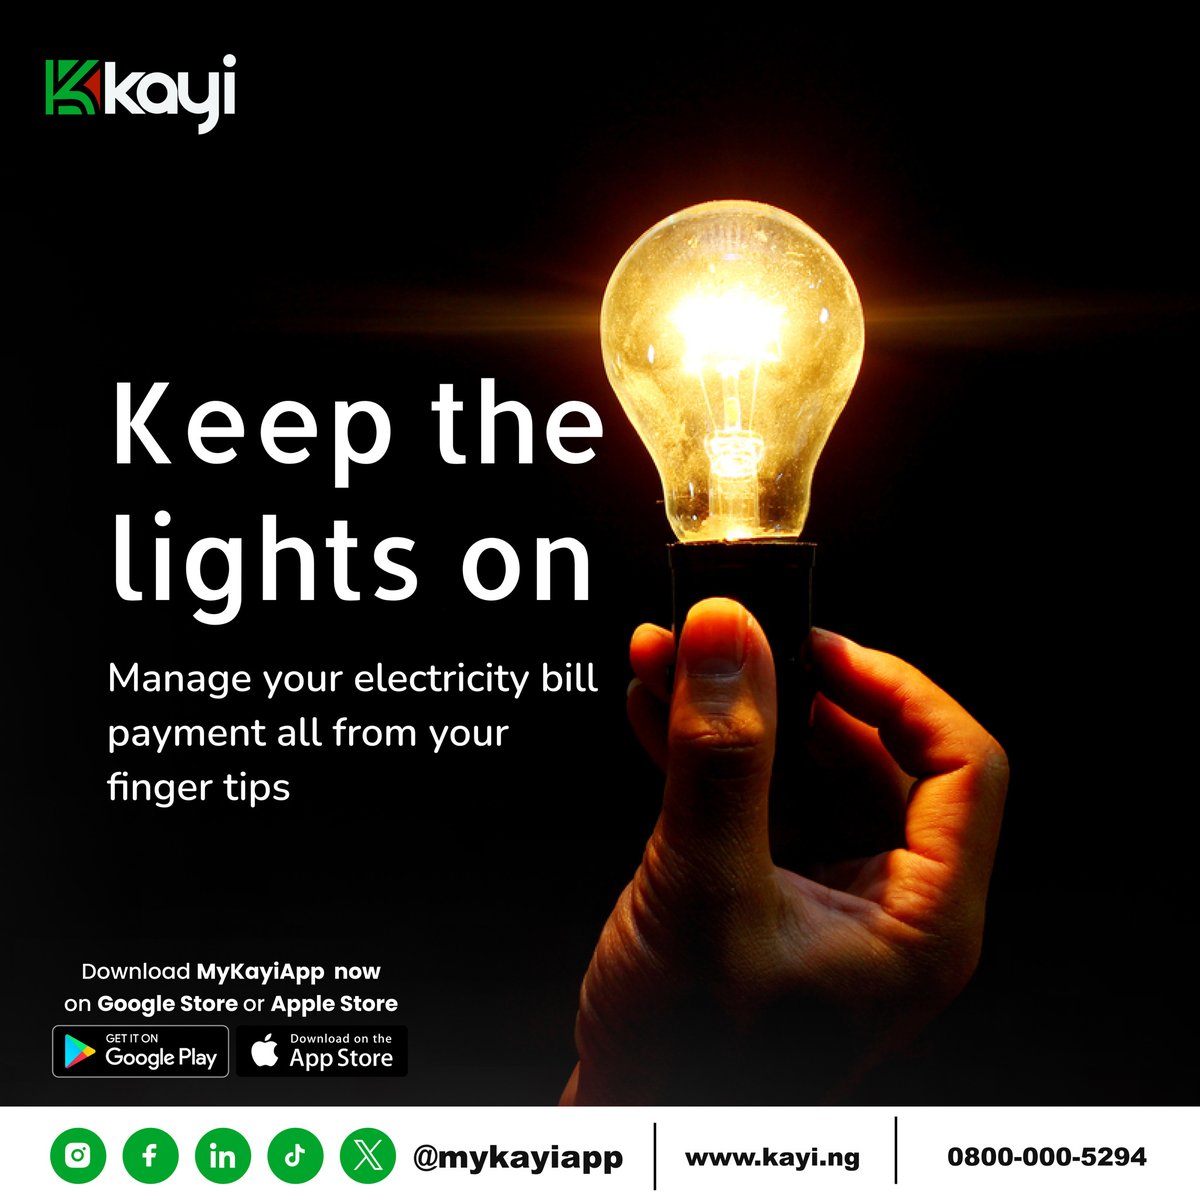 Keep the lights on with ease! With Kayiapp, paying your electricity bill is quick and convenient. Say goodbye to power outages and hello to uninterrupted power supply. Keep your home powered up hassle-free!

#MyKayiapp #AIDrivenBanking 
#Convenience
#Kayiway
#Digitalbanking